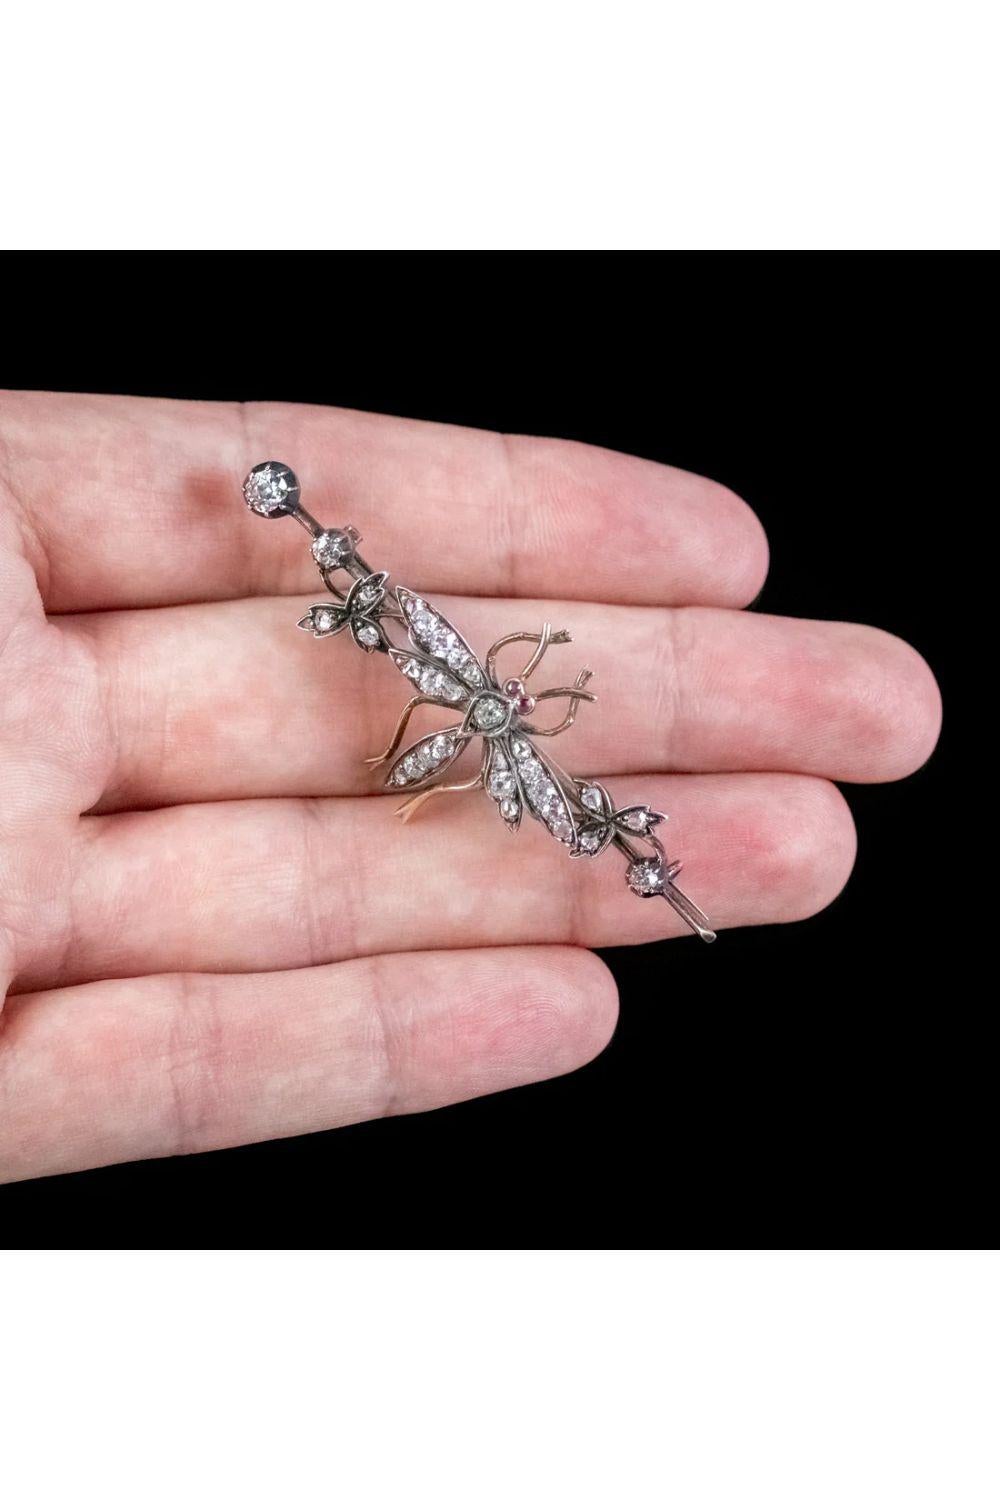 Women's Antique Victorian Diamond Insect Brooch Silver 18 Carat Gold, circa 1900 For Sale